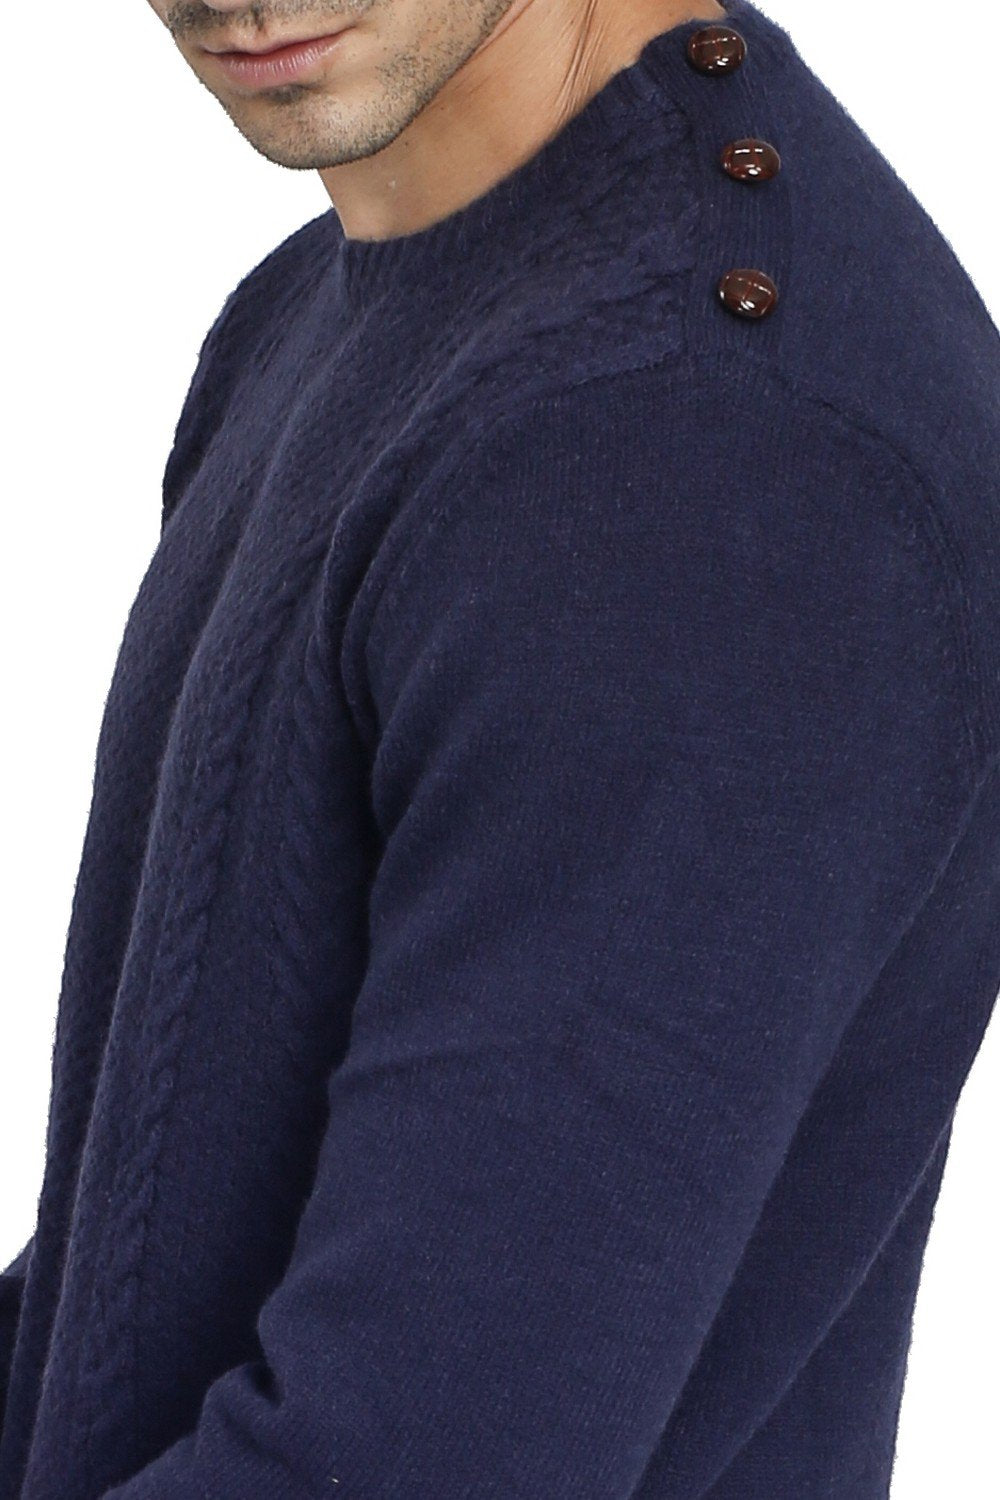 ROUND COLLAR SWEATER WITH CABLE KNIT AND BUTTONS ON SHOULDER